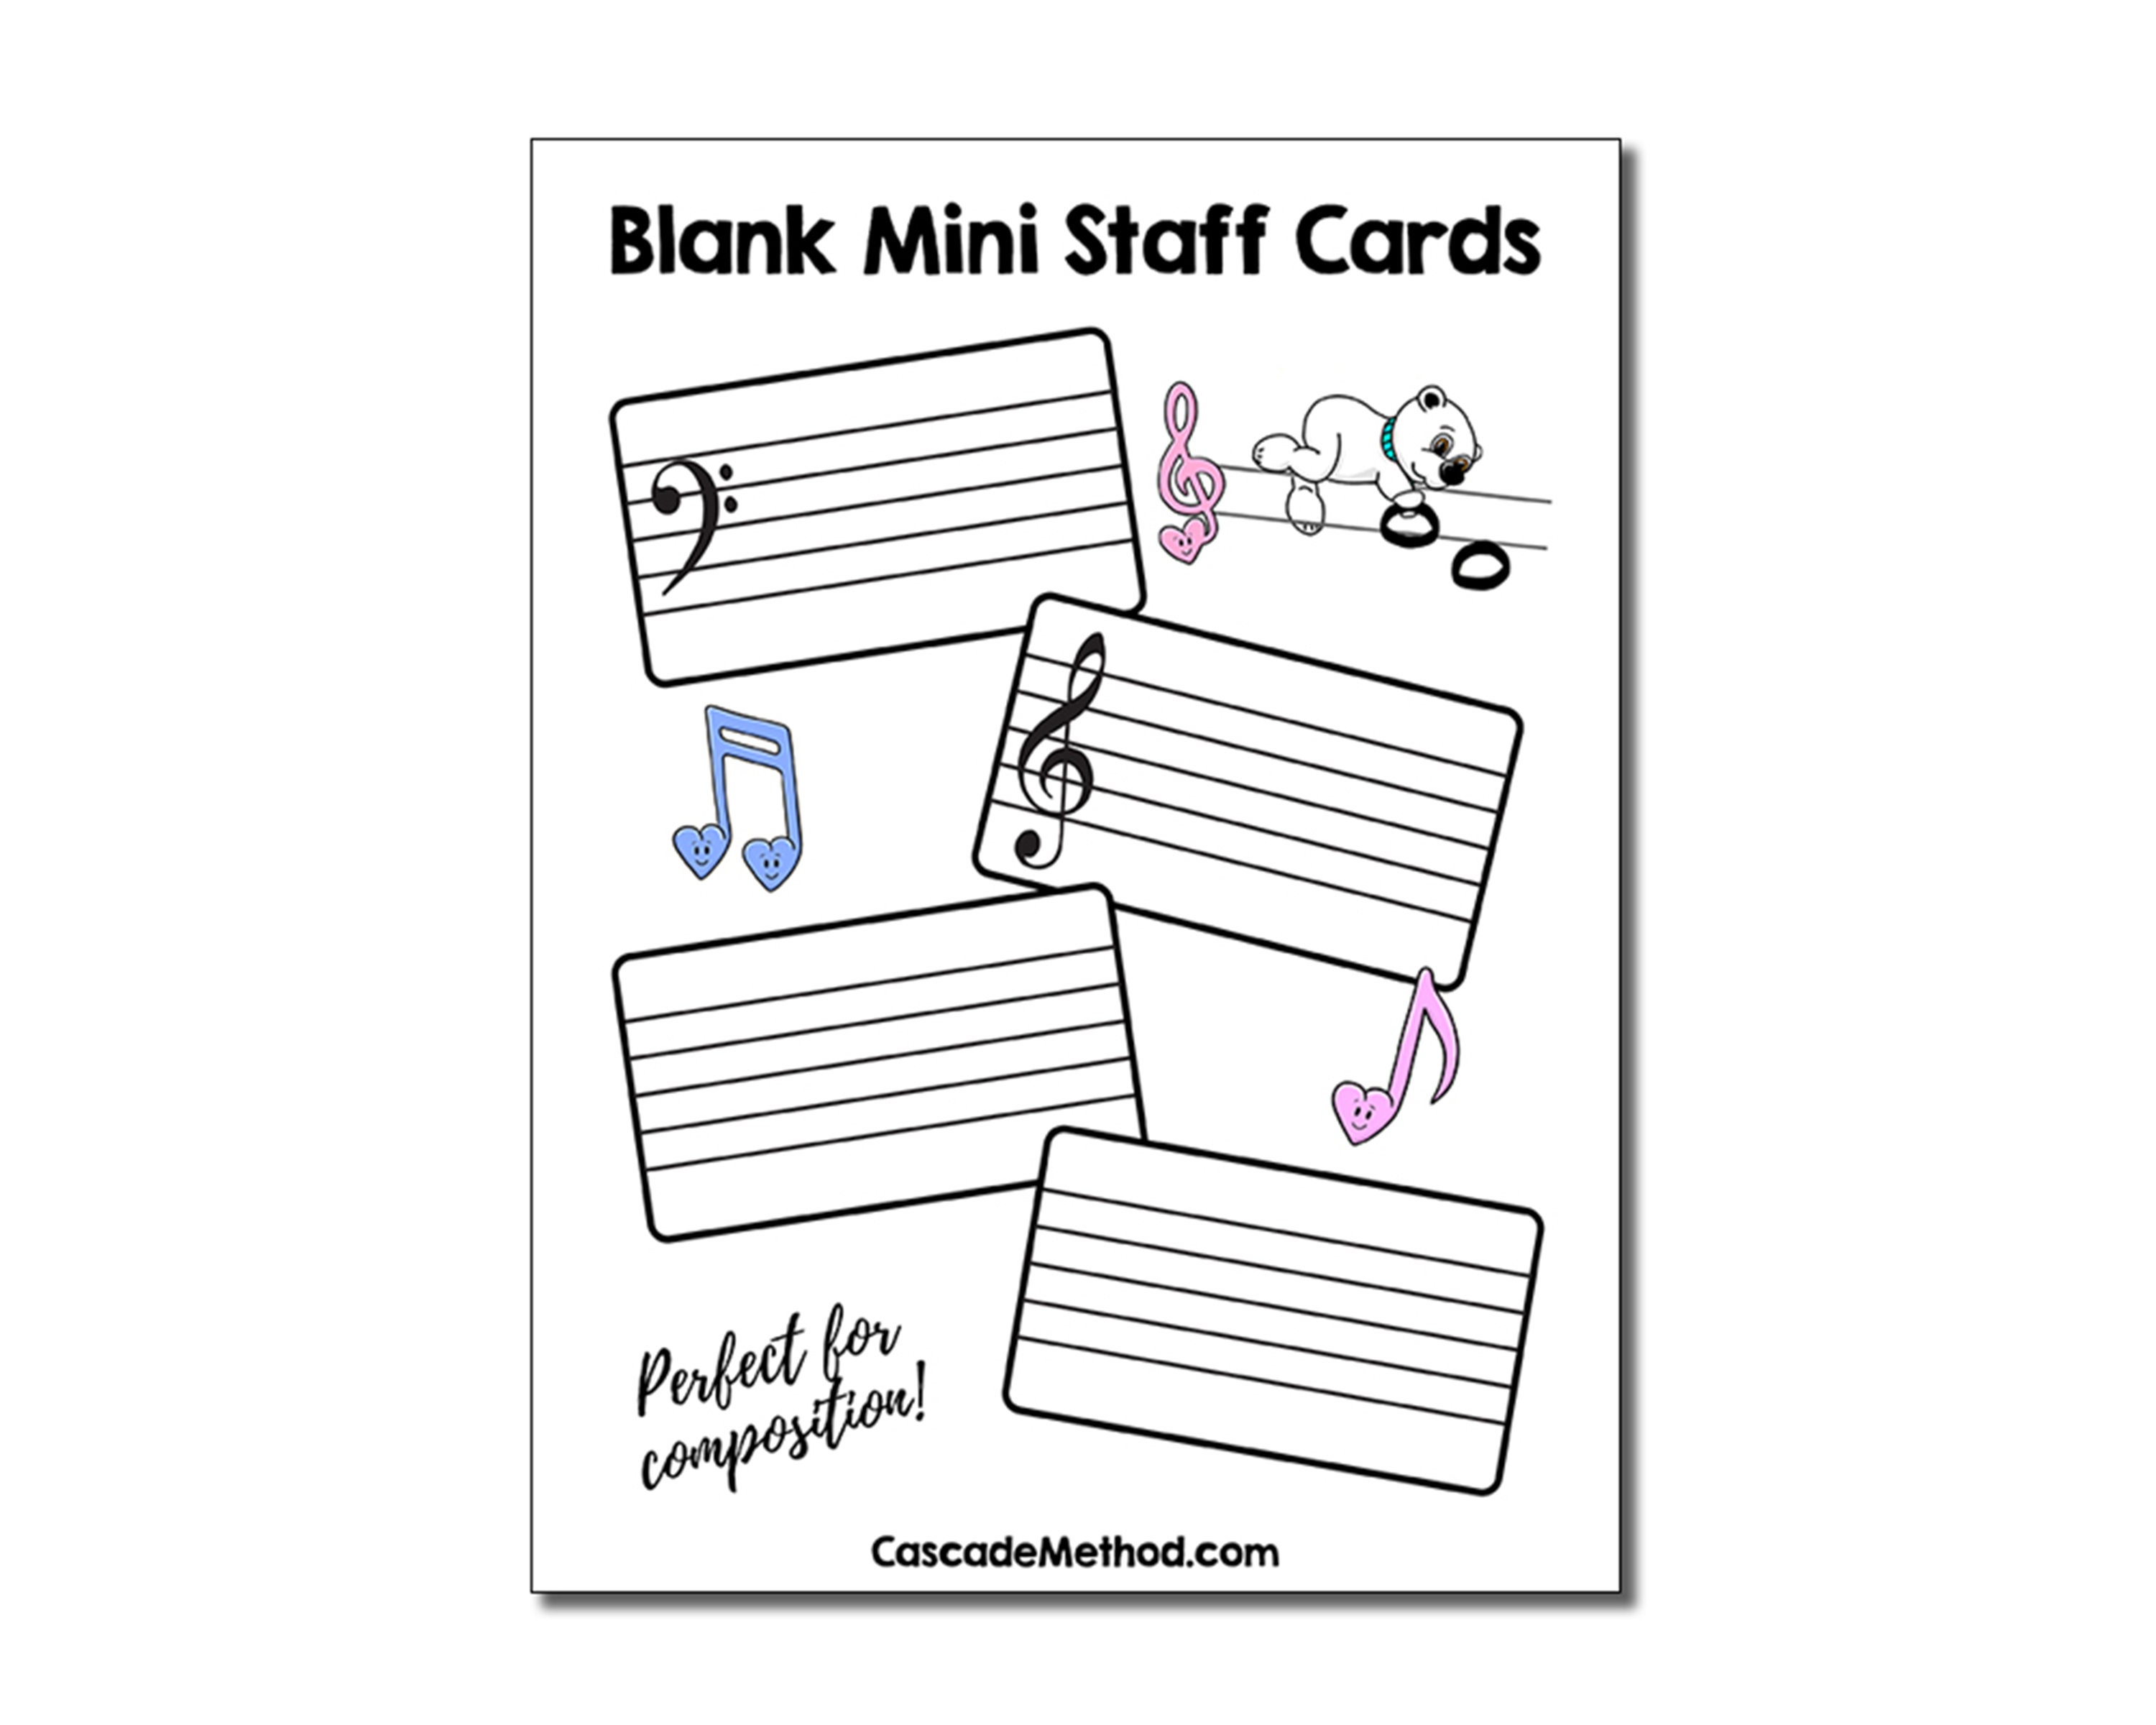 Printable 4x6 Index Card. Printable Note Cards. Printable Index Cards.  Blank Index Cards. Index Card PDF. Index Card Template. 